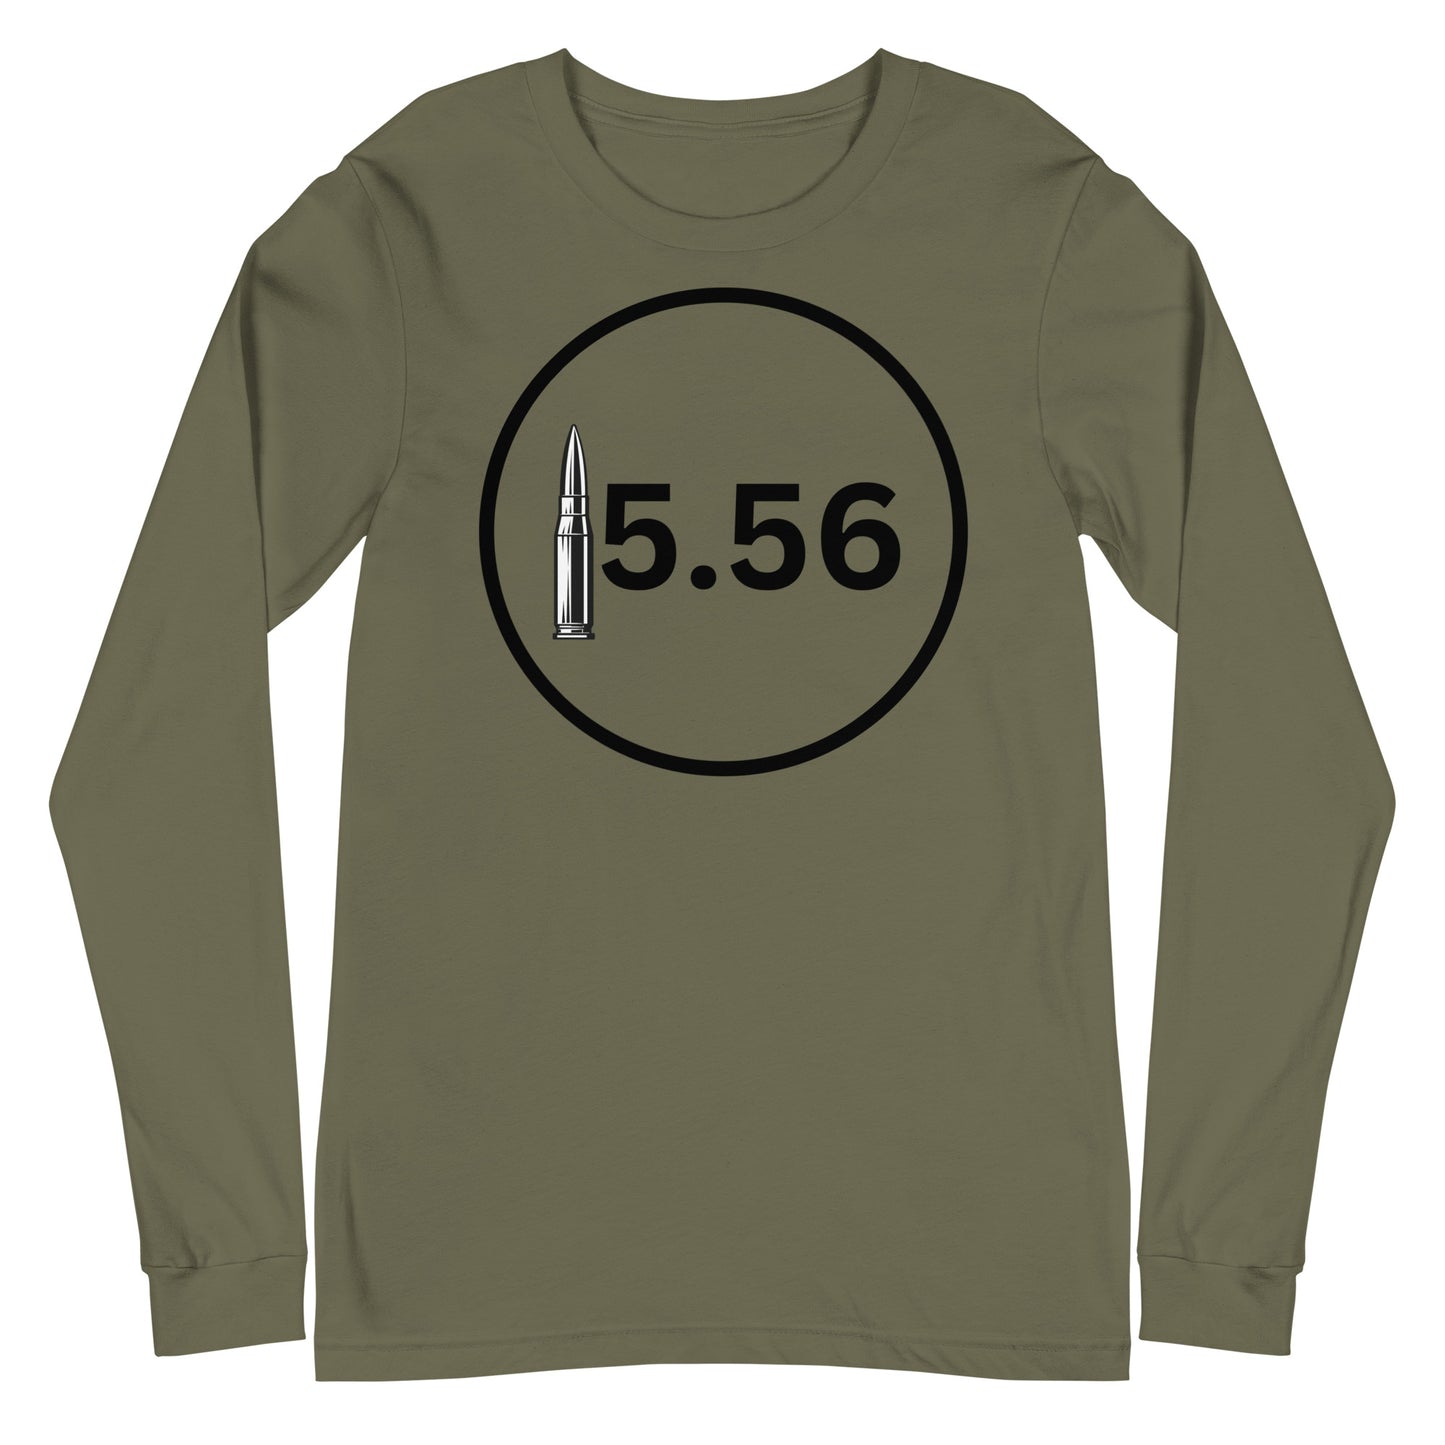 "Patriotic 5.56 Military Green Long Sleeve T-shirt featuring the caliber '5.56' and American flag design."